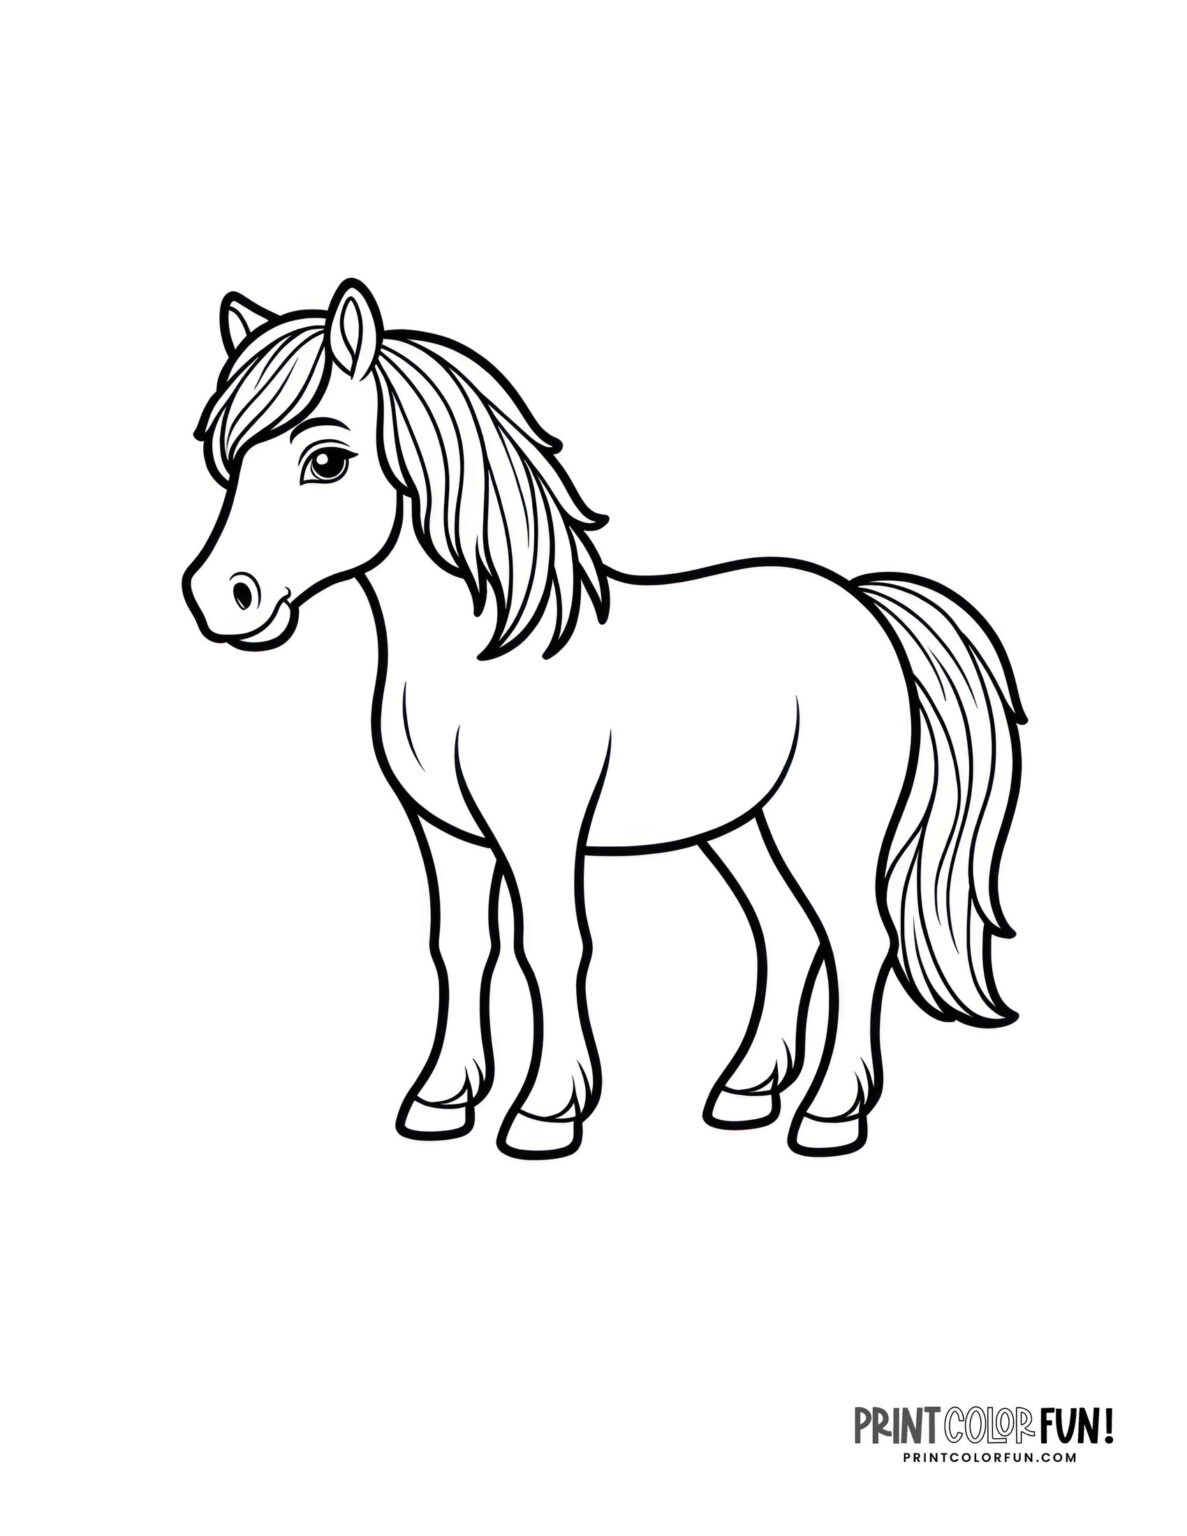 60 beautiful horse coloring pages plus crafts & educational games to ...